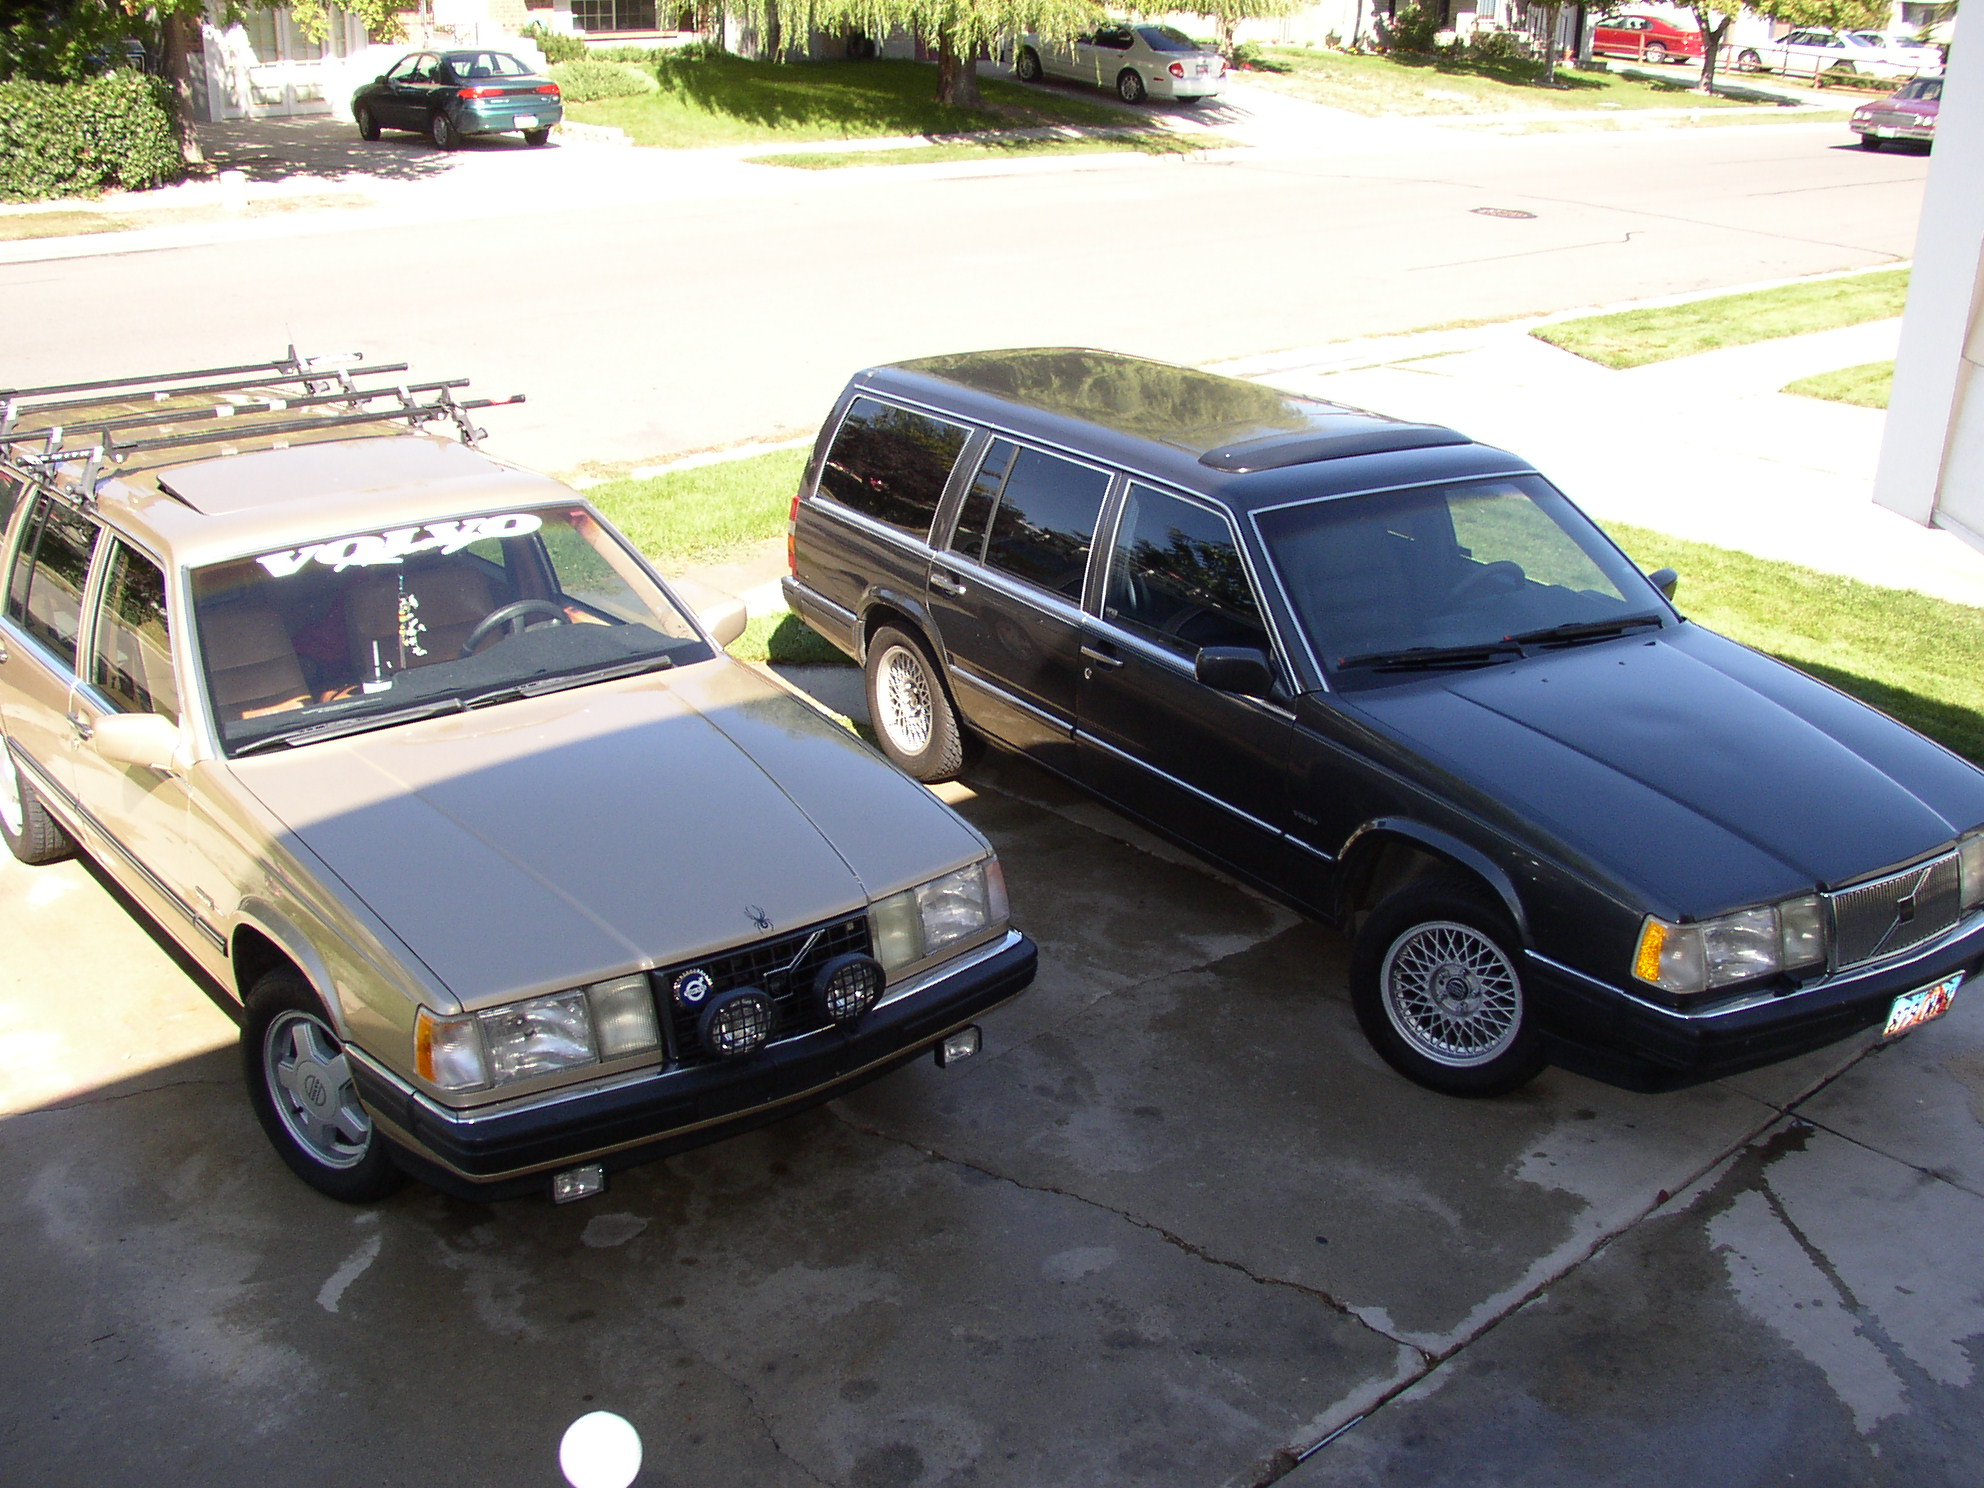 Mike's 1990 Volvo 760 Turbo Wagon. Here is just the beginning of the